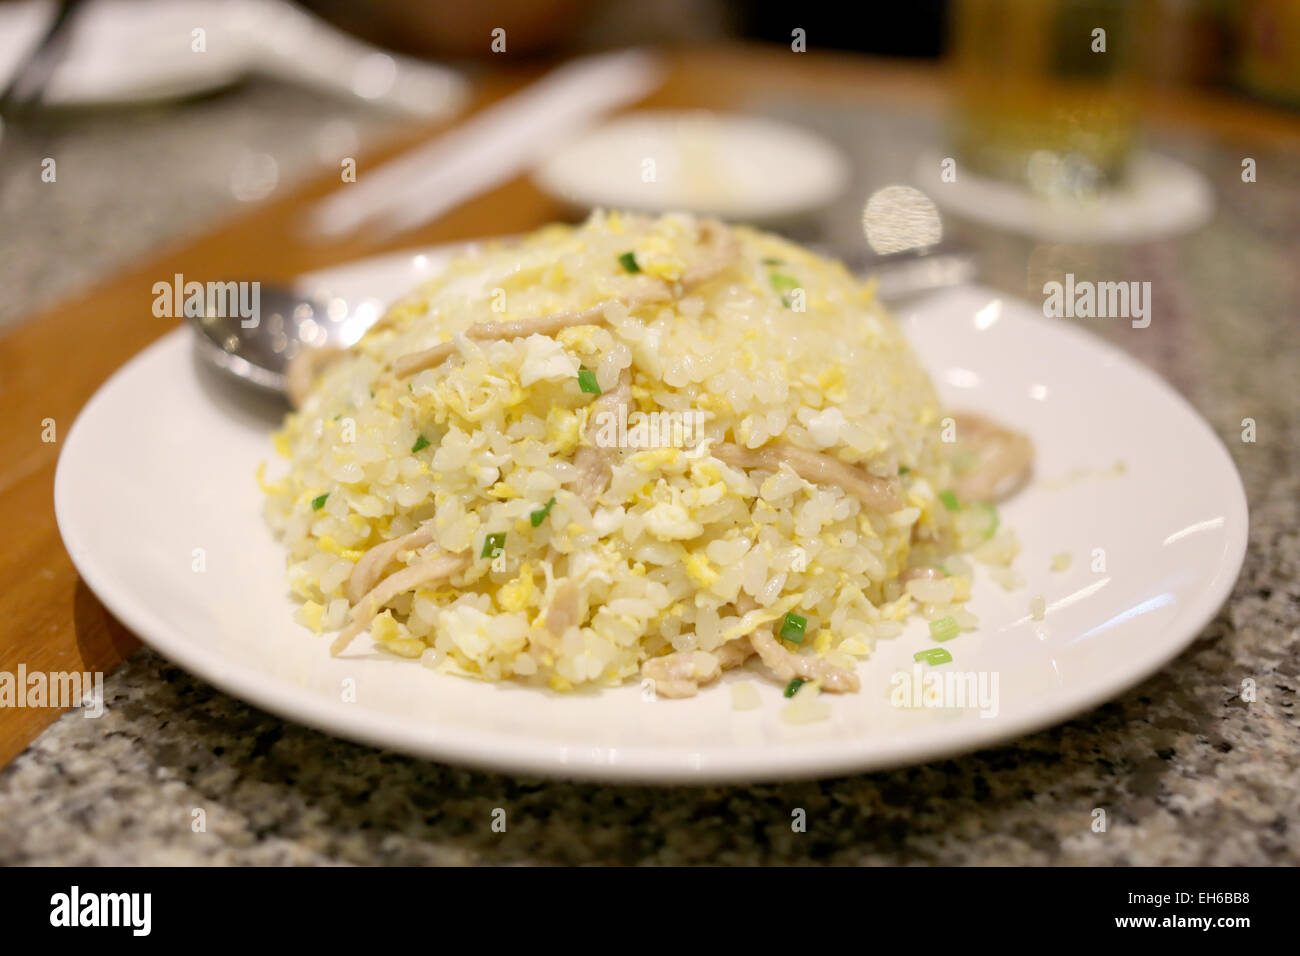 Fried rice on white dish at the restaurant. Stock Photo